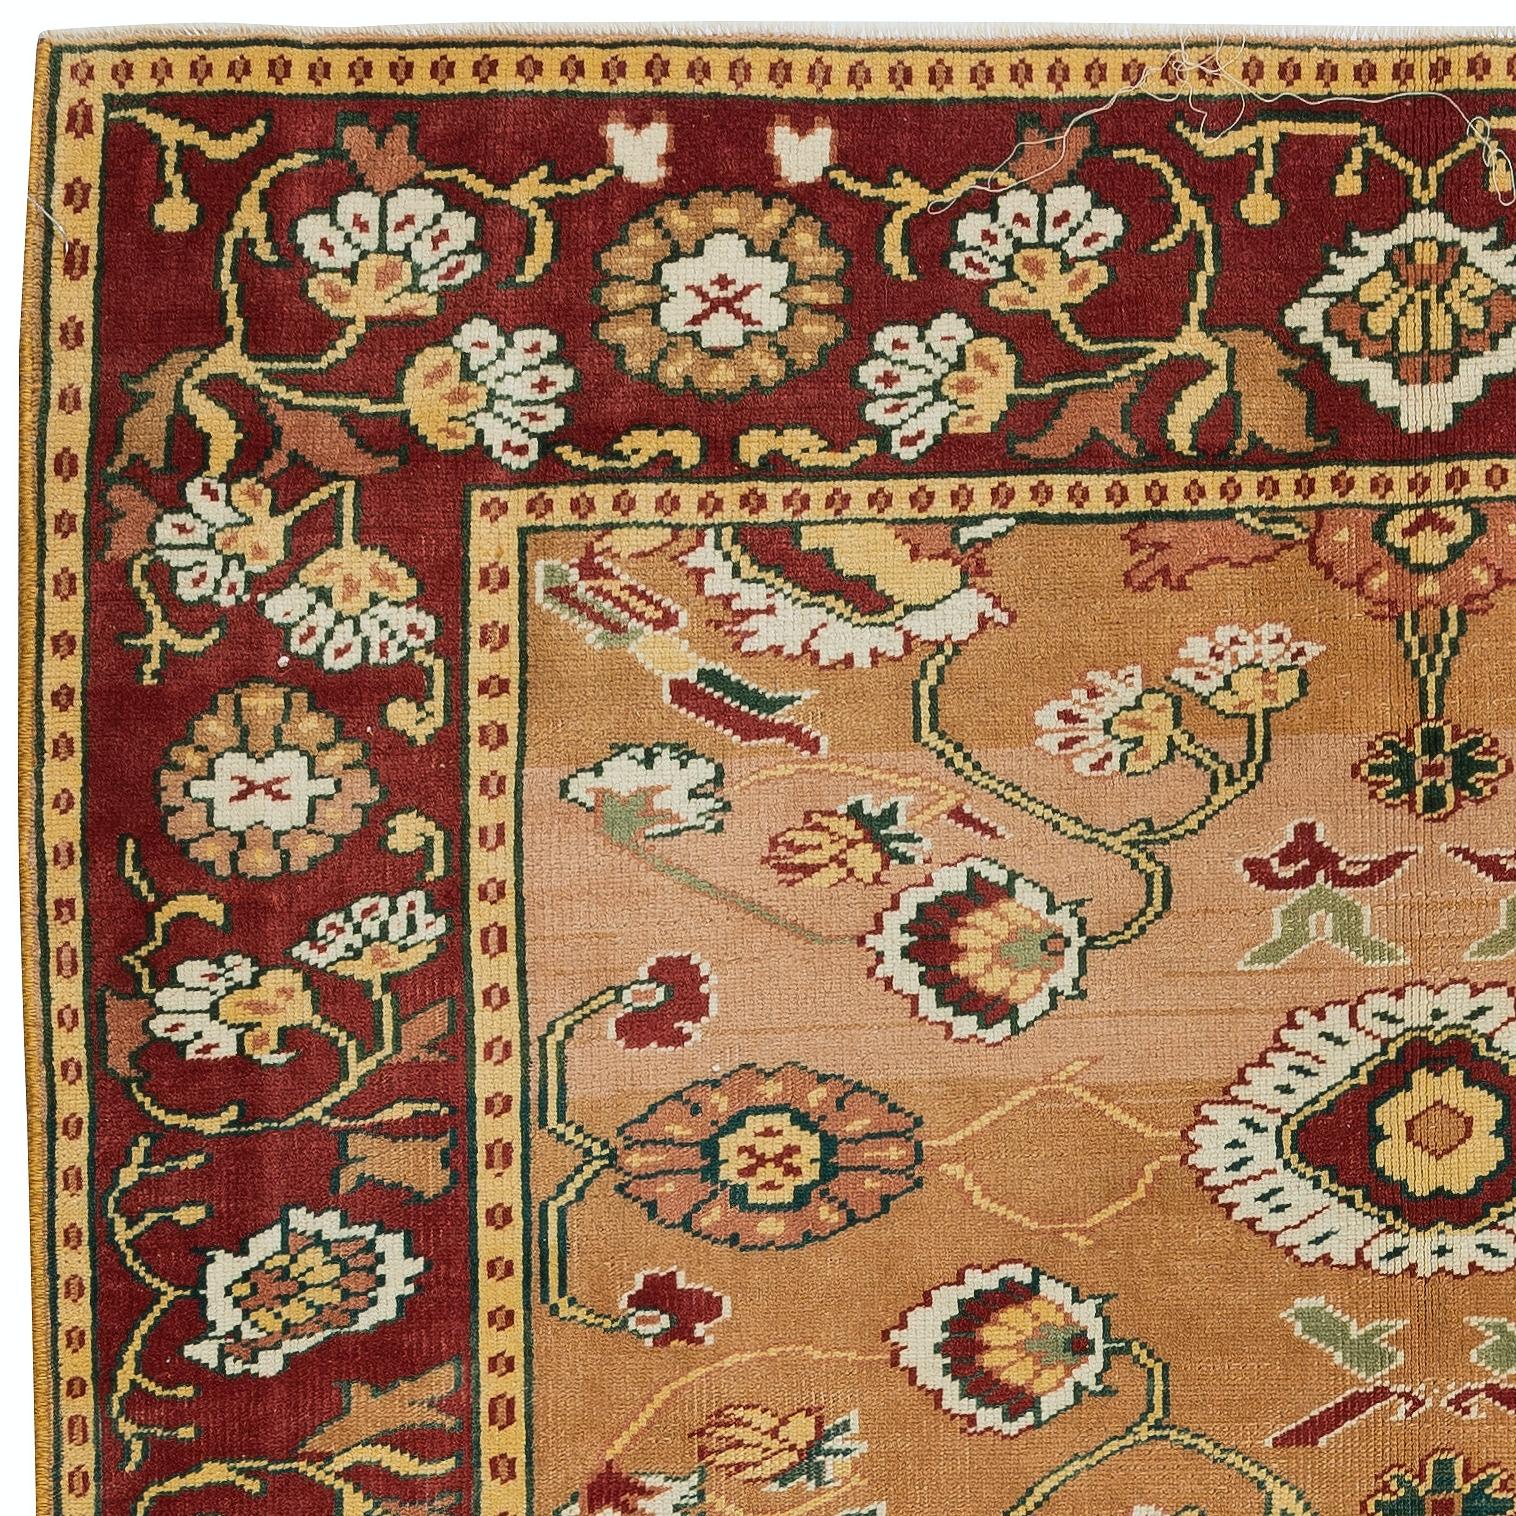 Hand-Woven 4.6x5.5 Ft Vintage Turkish Rug with Floral Design, One of a Kind Handmade Carpet For Sale